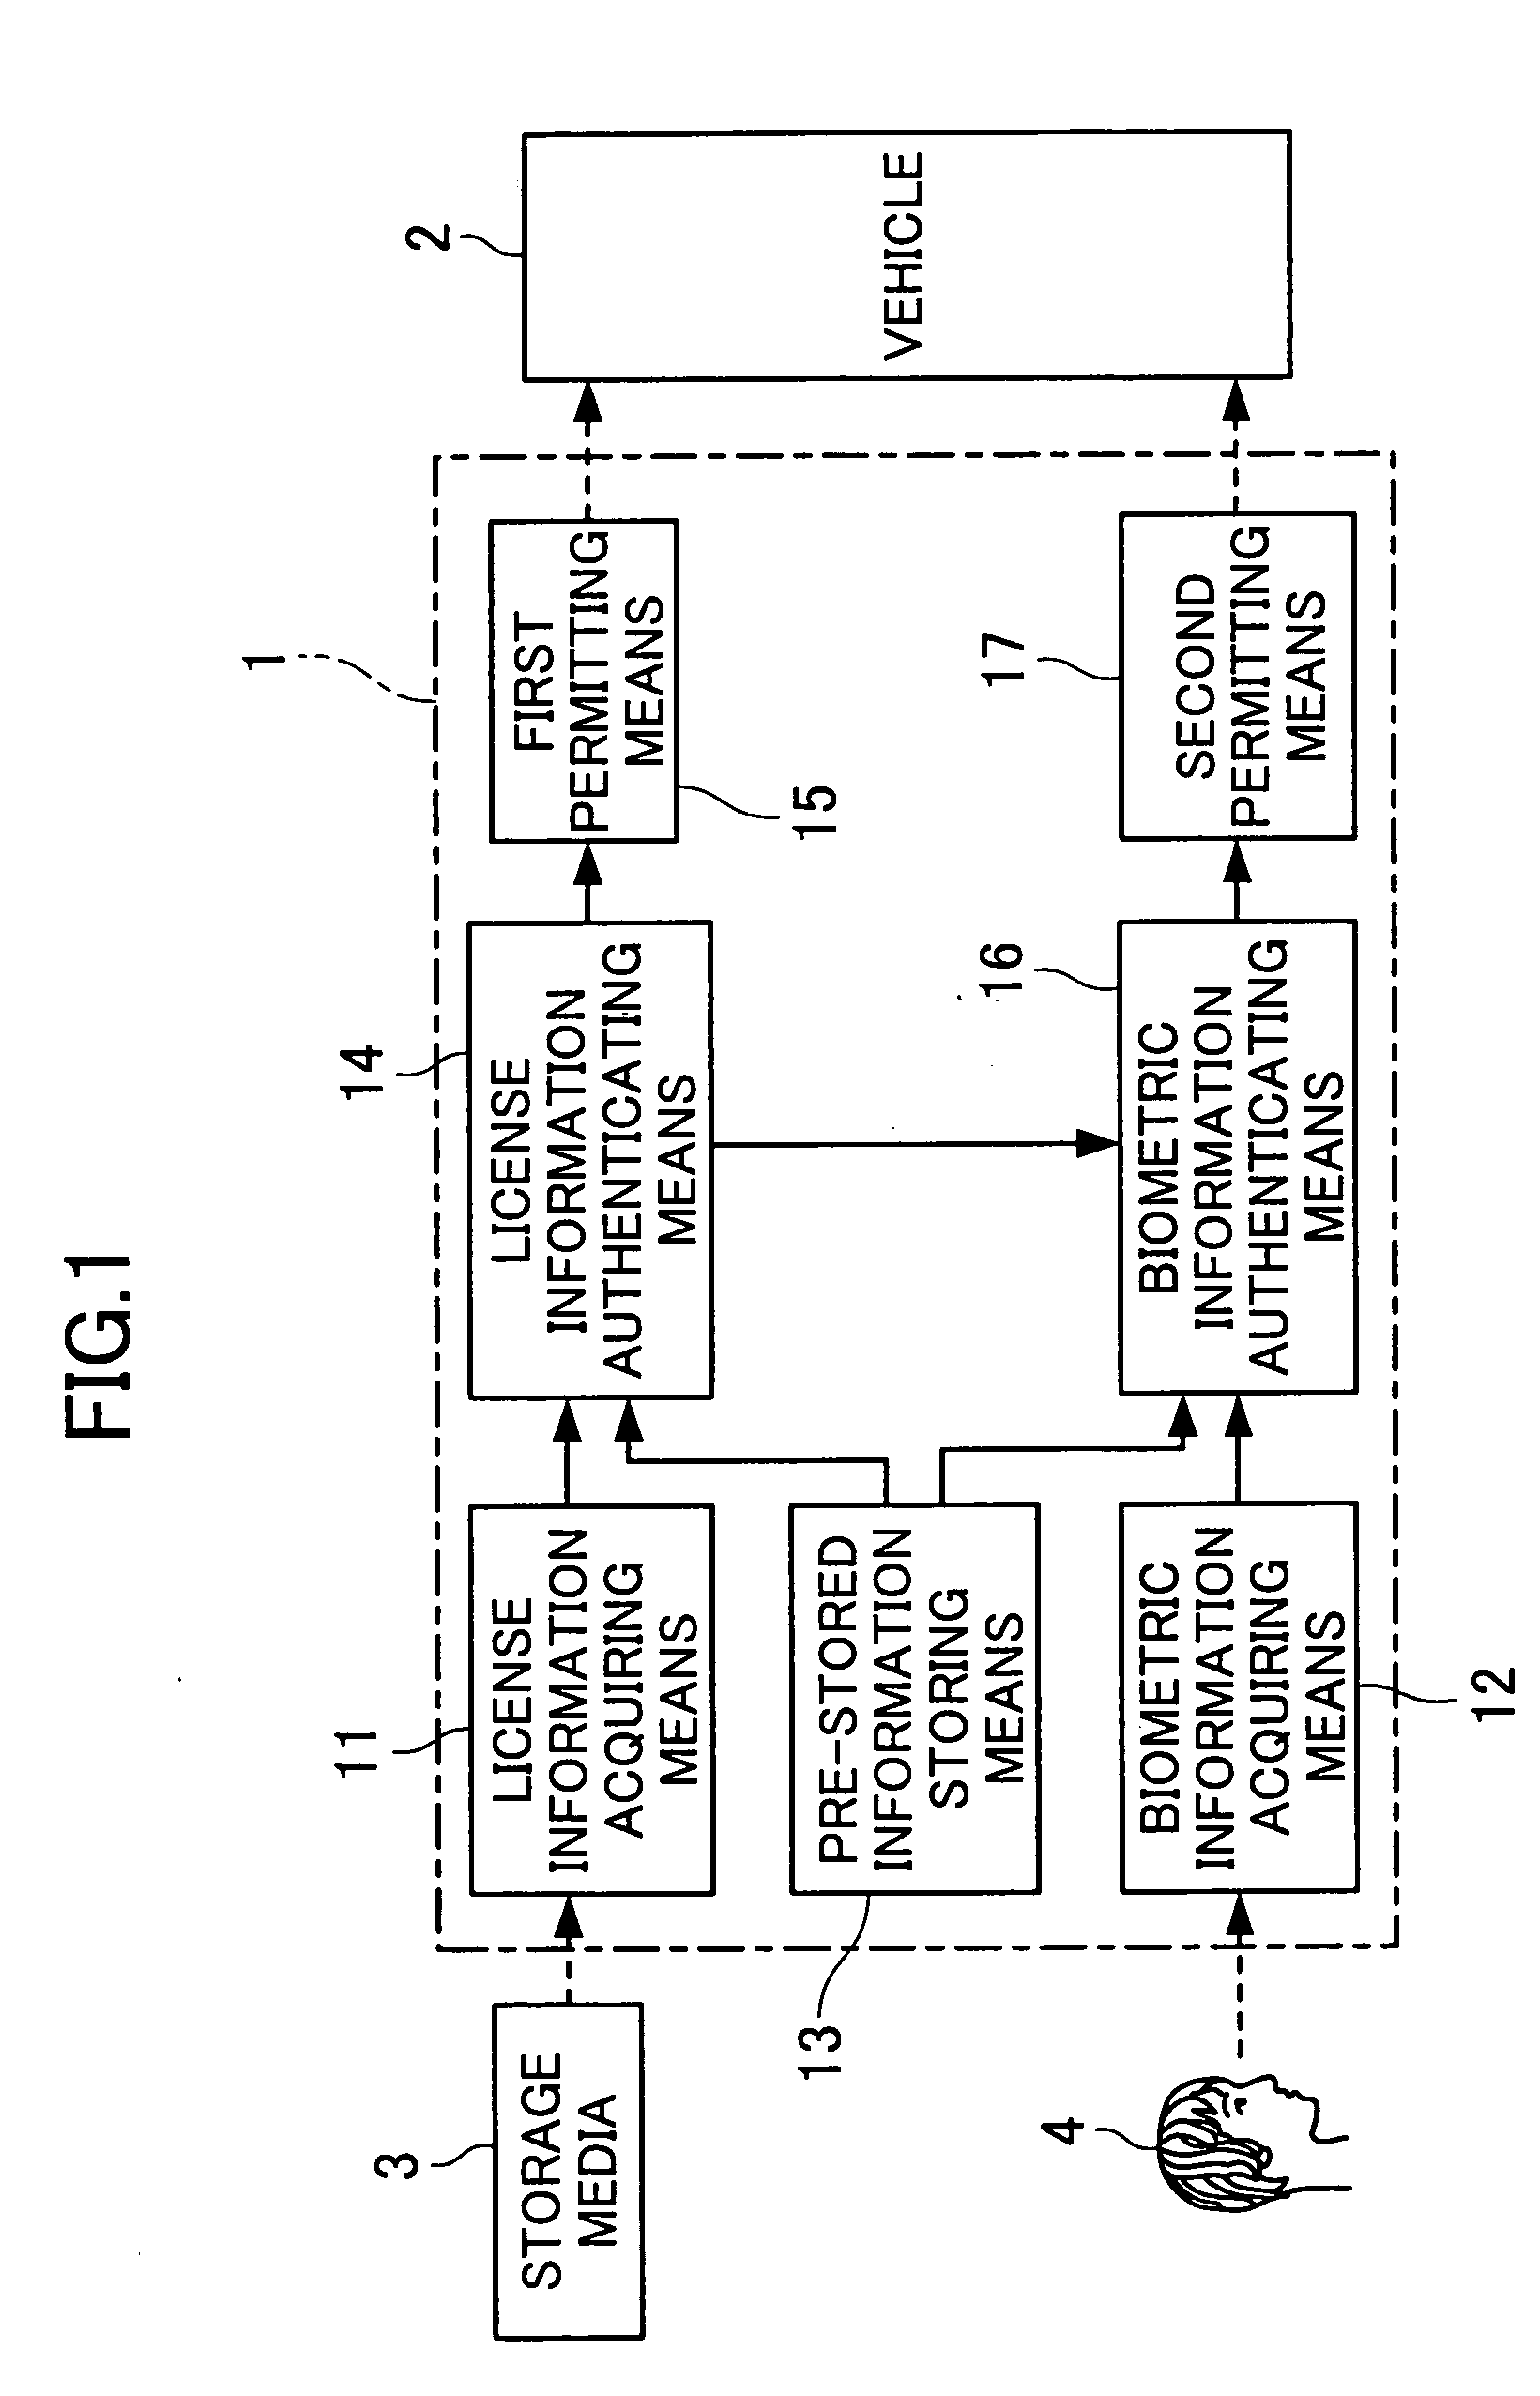 Combined individual authentication system